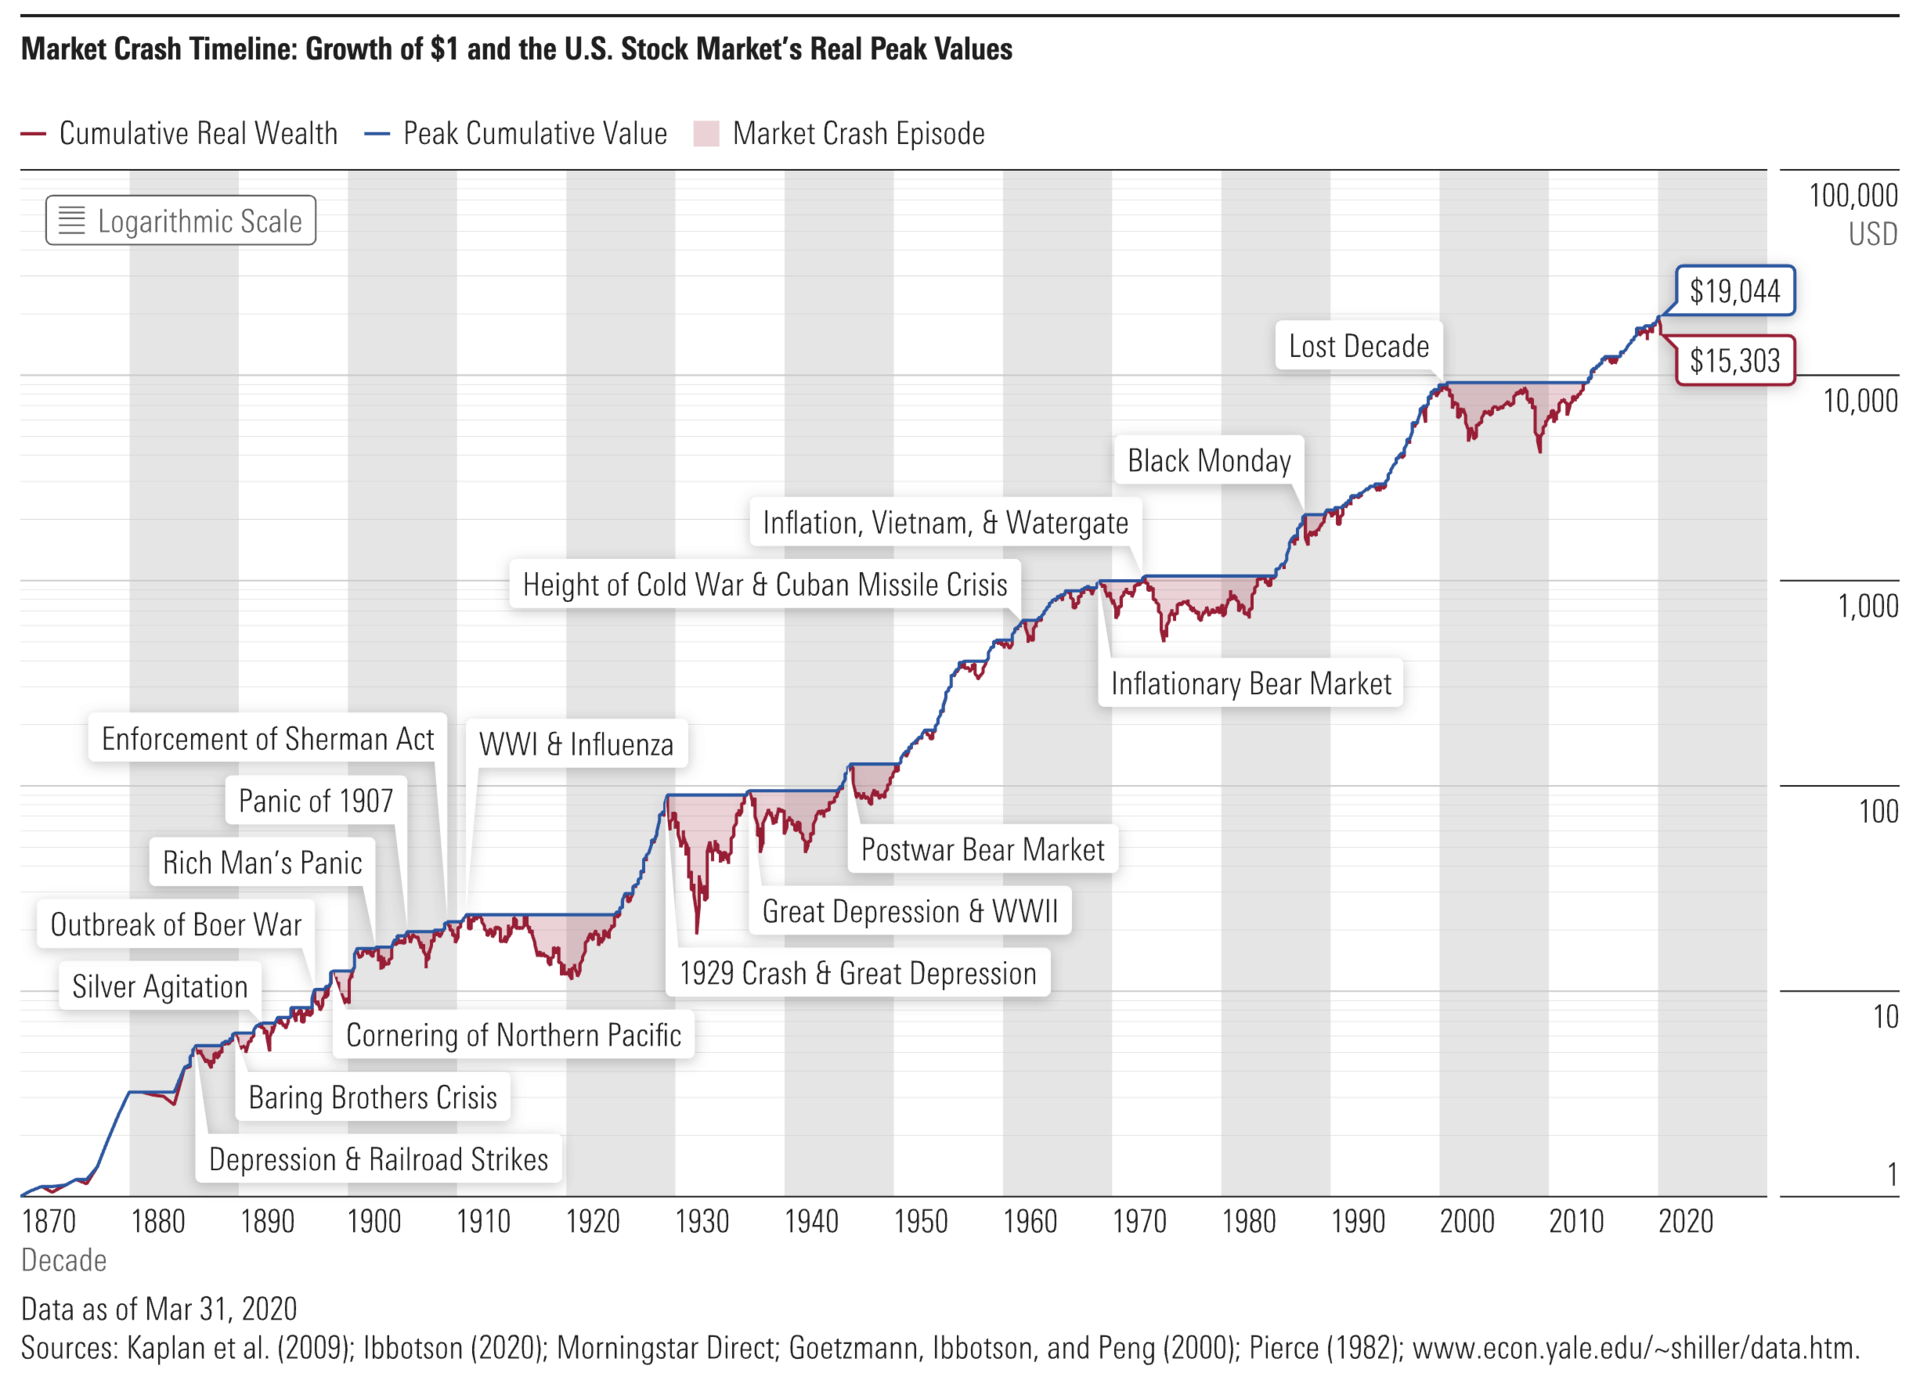 Comparing COVID-19 and Previous Bear Markets - Market Crash Timeline